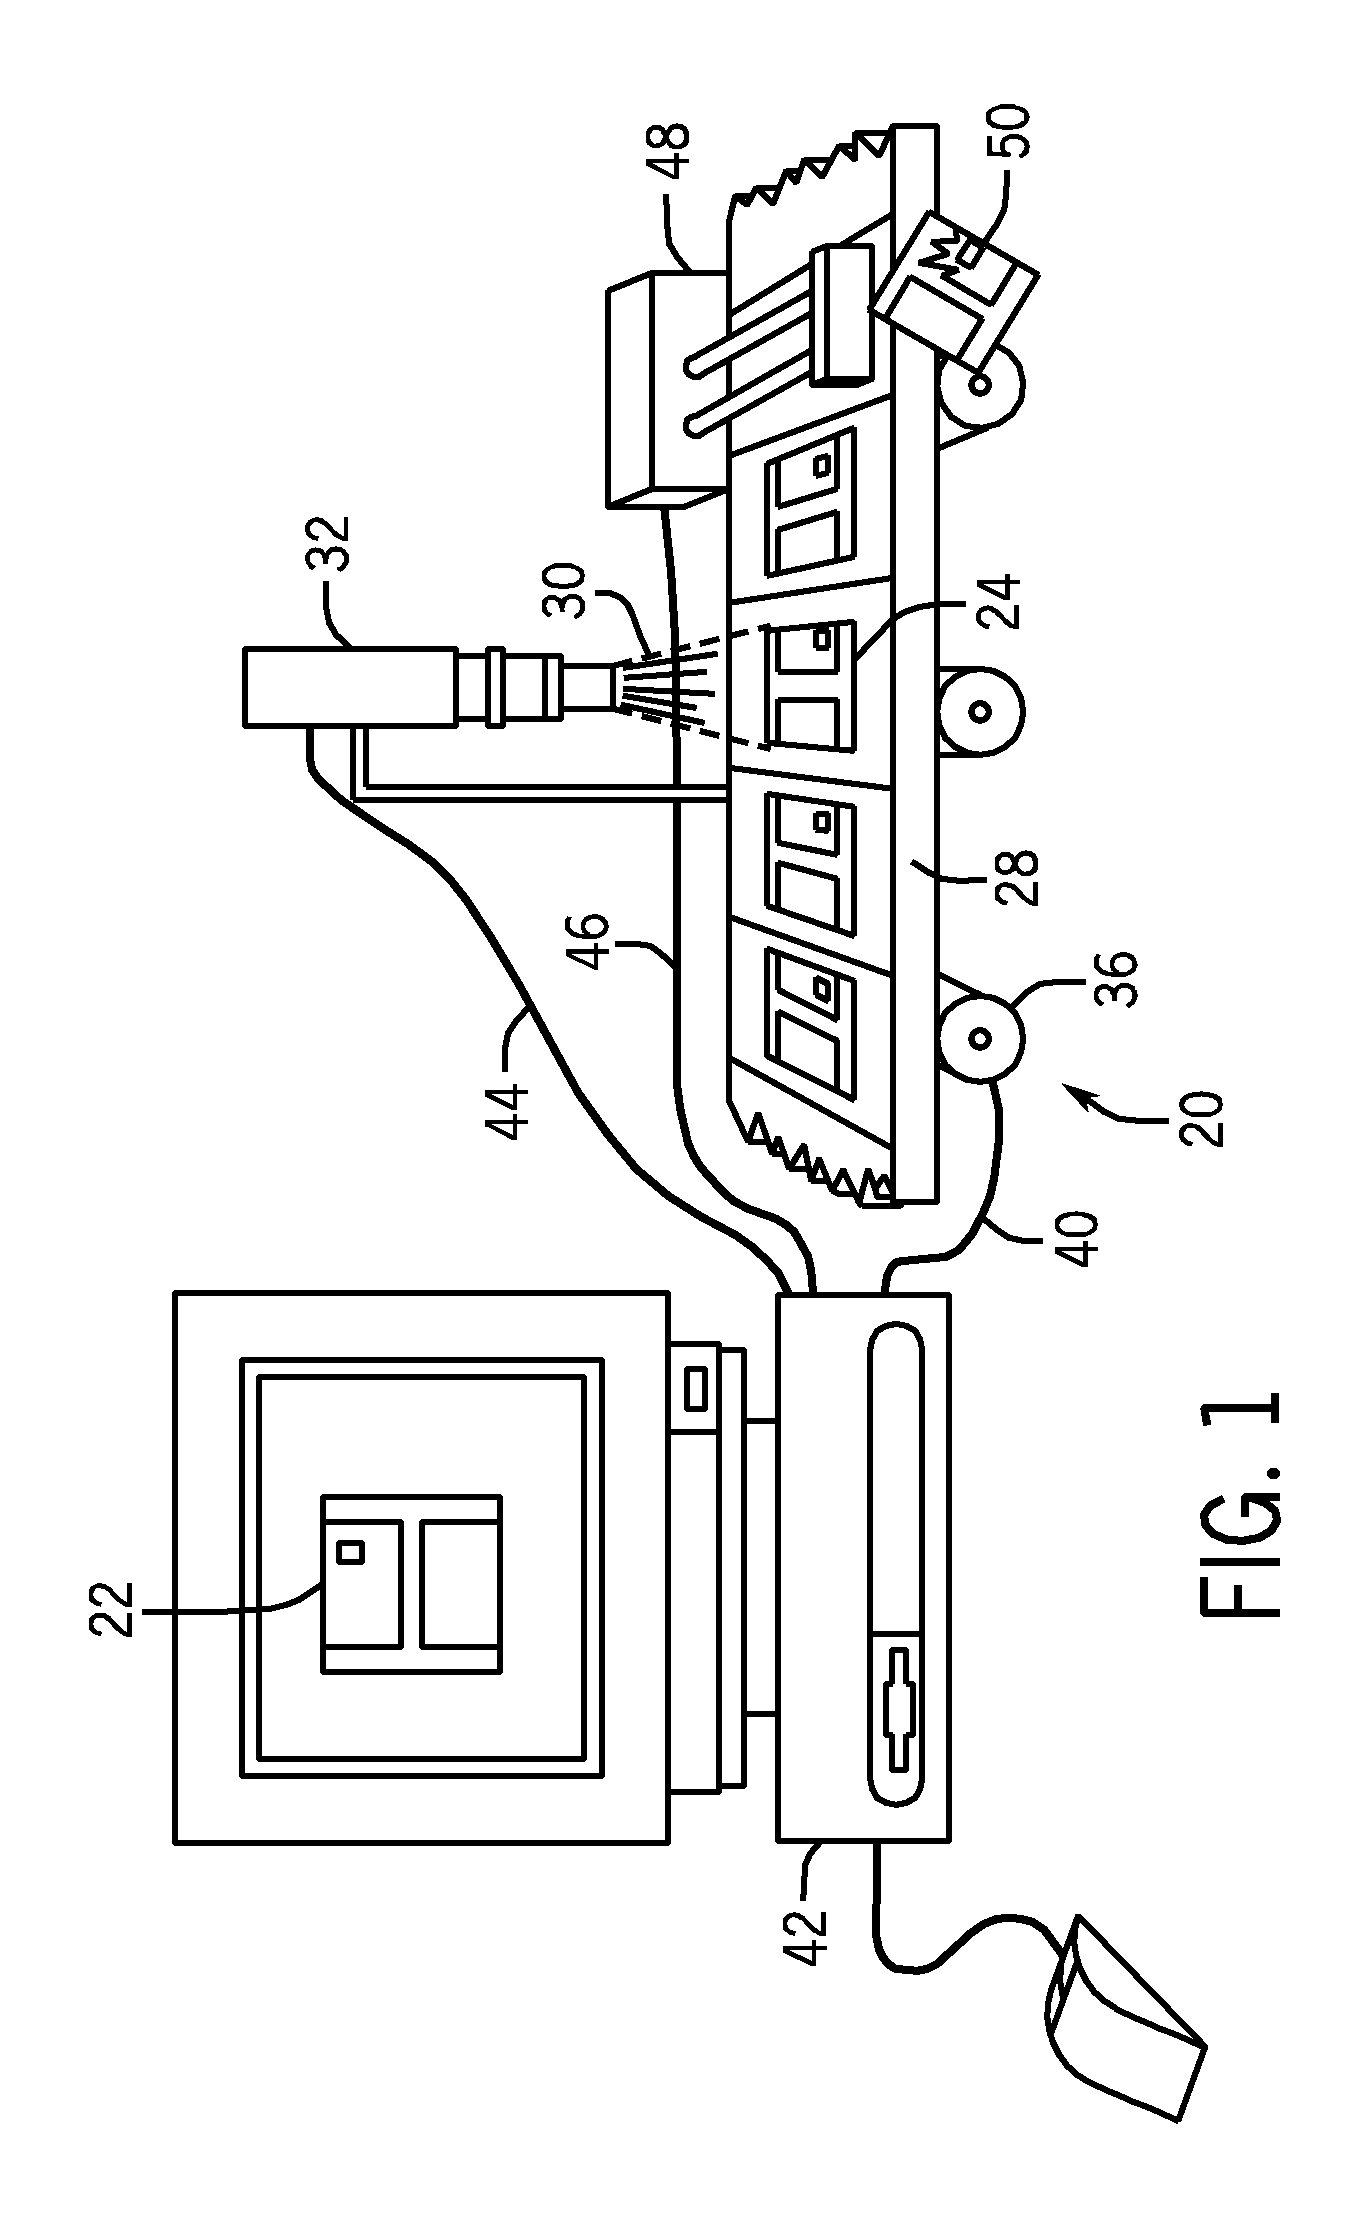 Machine Vision Systems and Methods with Predictive Motion Control